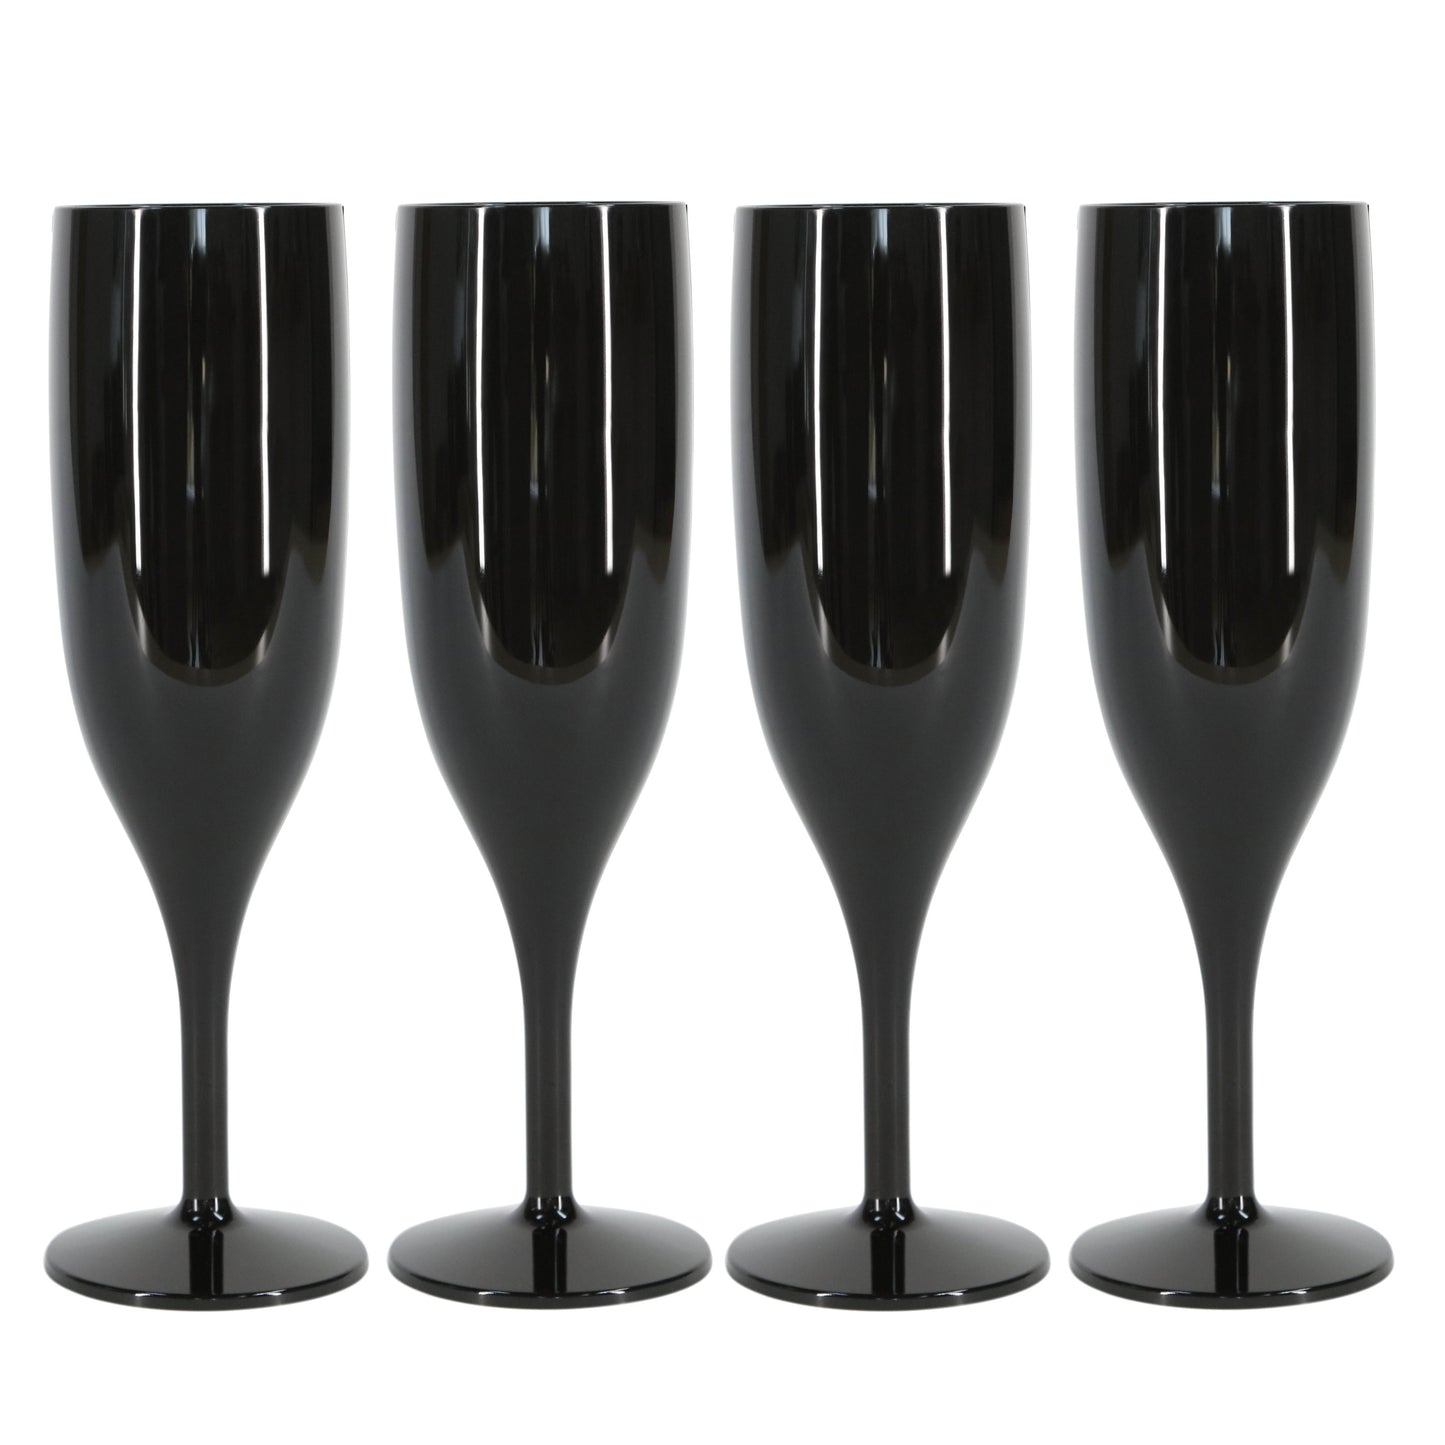 48 x Black Prosecco Flutes – Made from Strong Reusable Plastic 1-Piece Champagne Glass (Pack of 48 Glasses) Halloween, Parties, Hot Tub-5056020186847-EY-PP-122-Product Pro-Baby Shower, Black Champagne Flutes, Black Champagne Glasses, Black Flutes, Black Prosecco Flutes, Black Prosecco Glasses, Bridal Shower, Halloween, Hen Do, Reusable Flutes